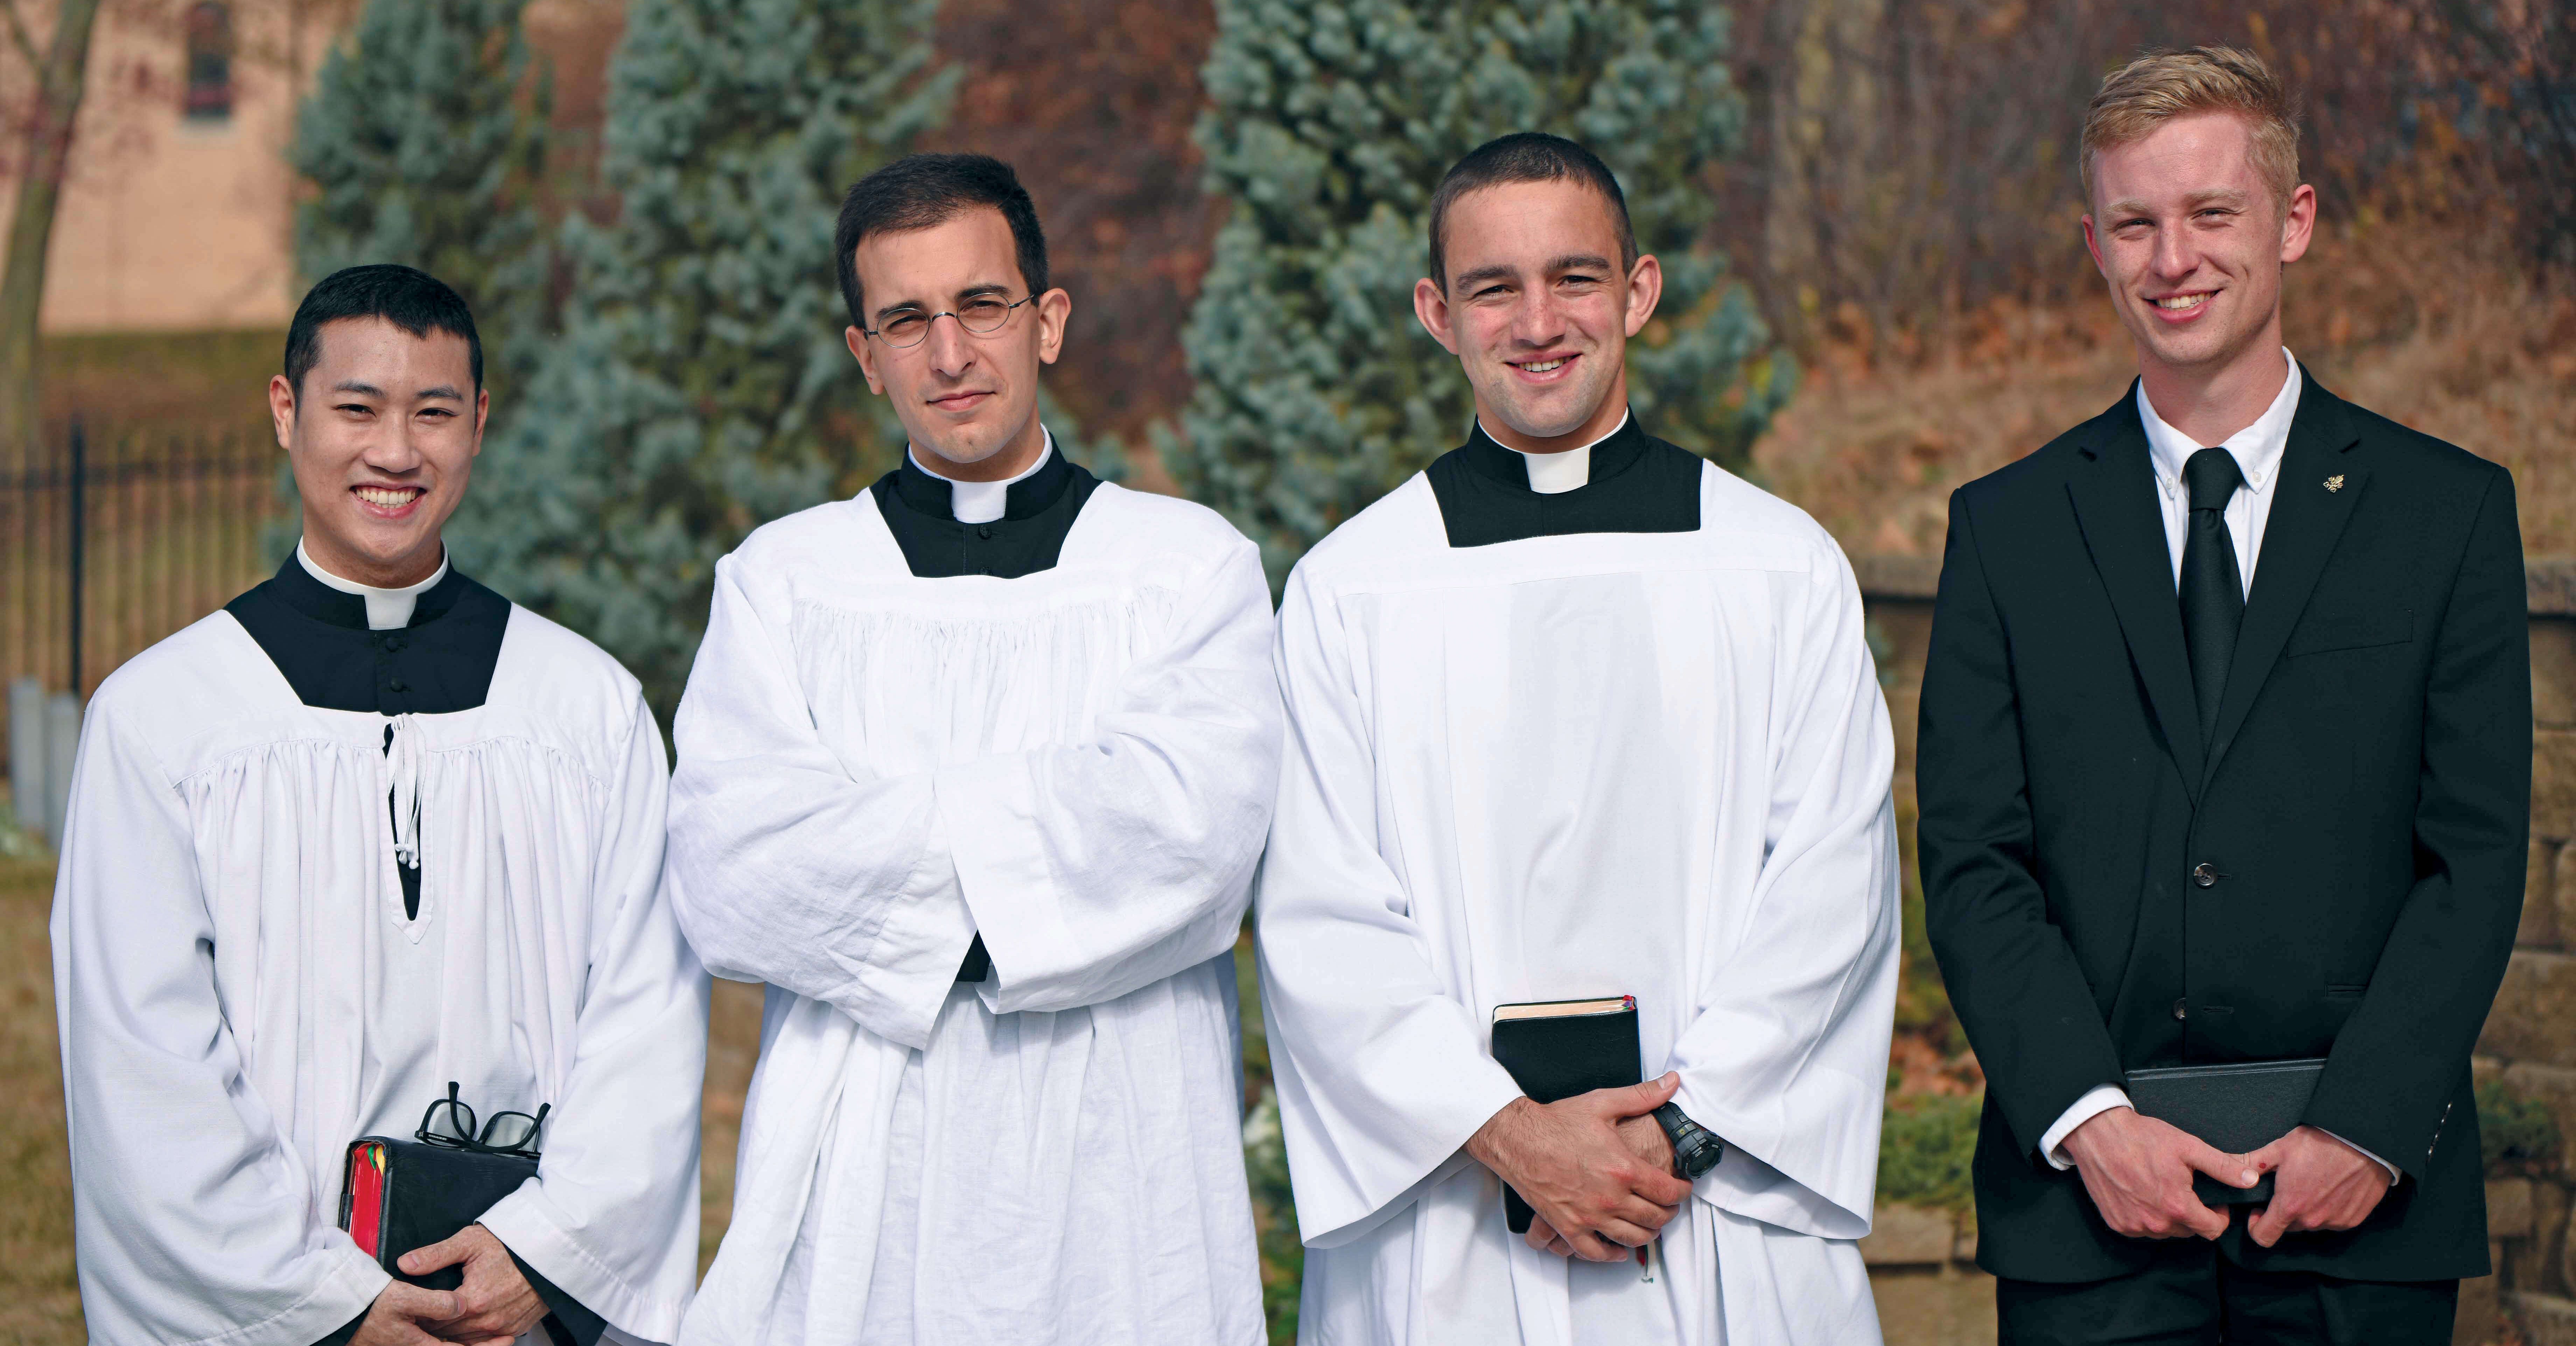 Seminarians currently discerning with the Priestly Fraternity of St. Peter (FSSP): Toan Cao ’18 is in his fifth year; John Falciano ’17 is in his third year and recently received the minor orders of porter and lector, David Prezzia ’20 is in his second year and recently received clerical tonsure; Patrick Barry ’21 just entered his first year. 